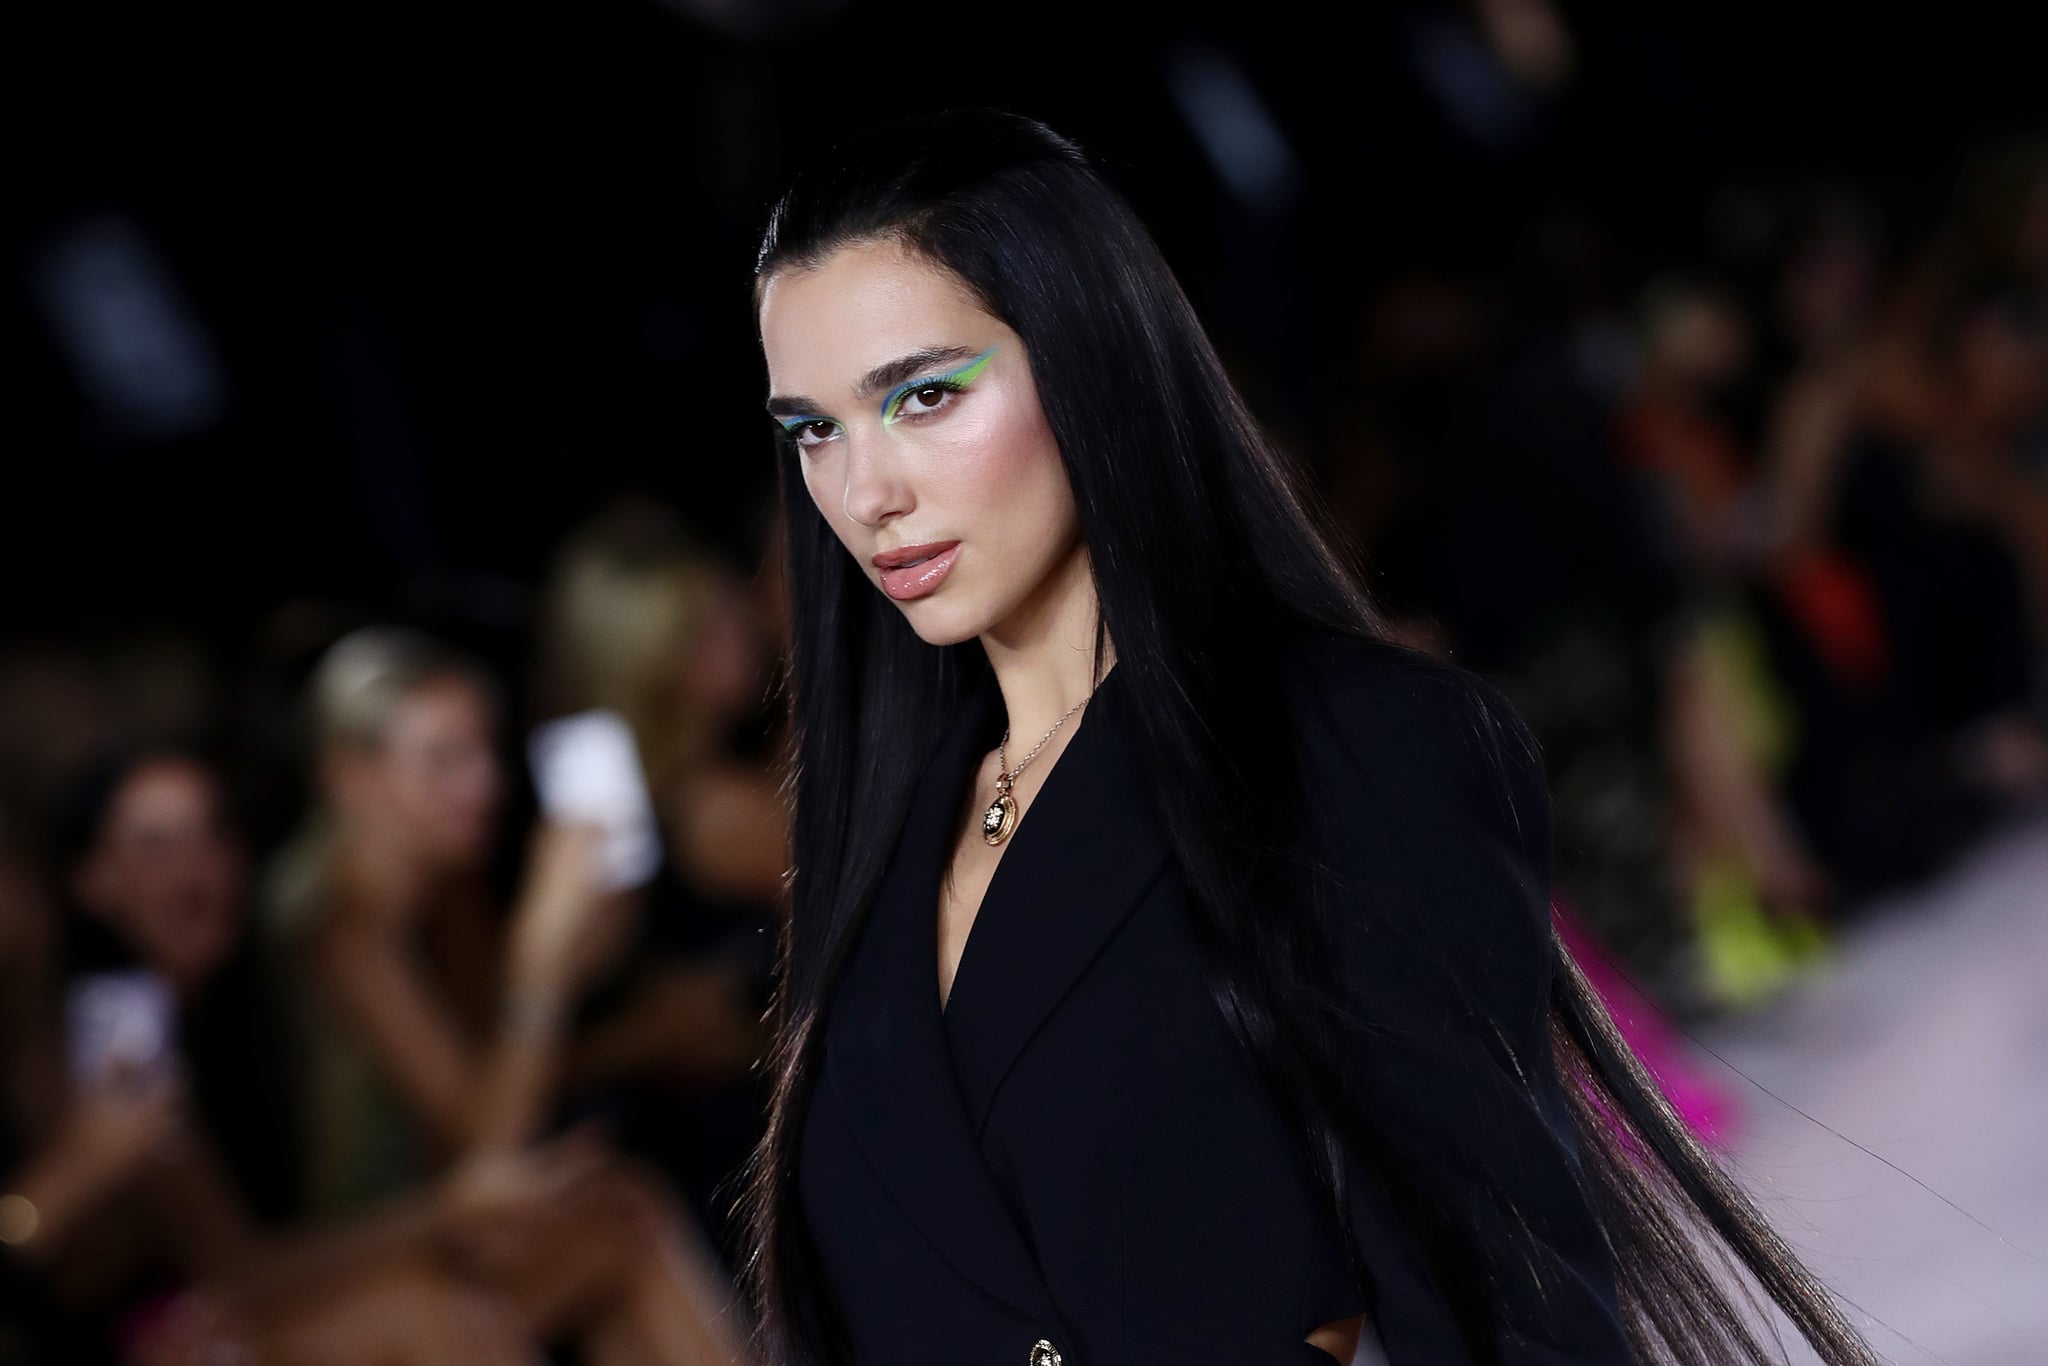 MILAN, ITALY - SEPTEMBER 24: Dua Lipa walks the runway at the Versace fashion show during the Milan Fashion Week - Spring / Summer 2022 on September 24, 2021 in Milan, Italy. (Photo by Vittorio Zunino Celotto/Getty Images)